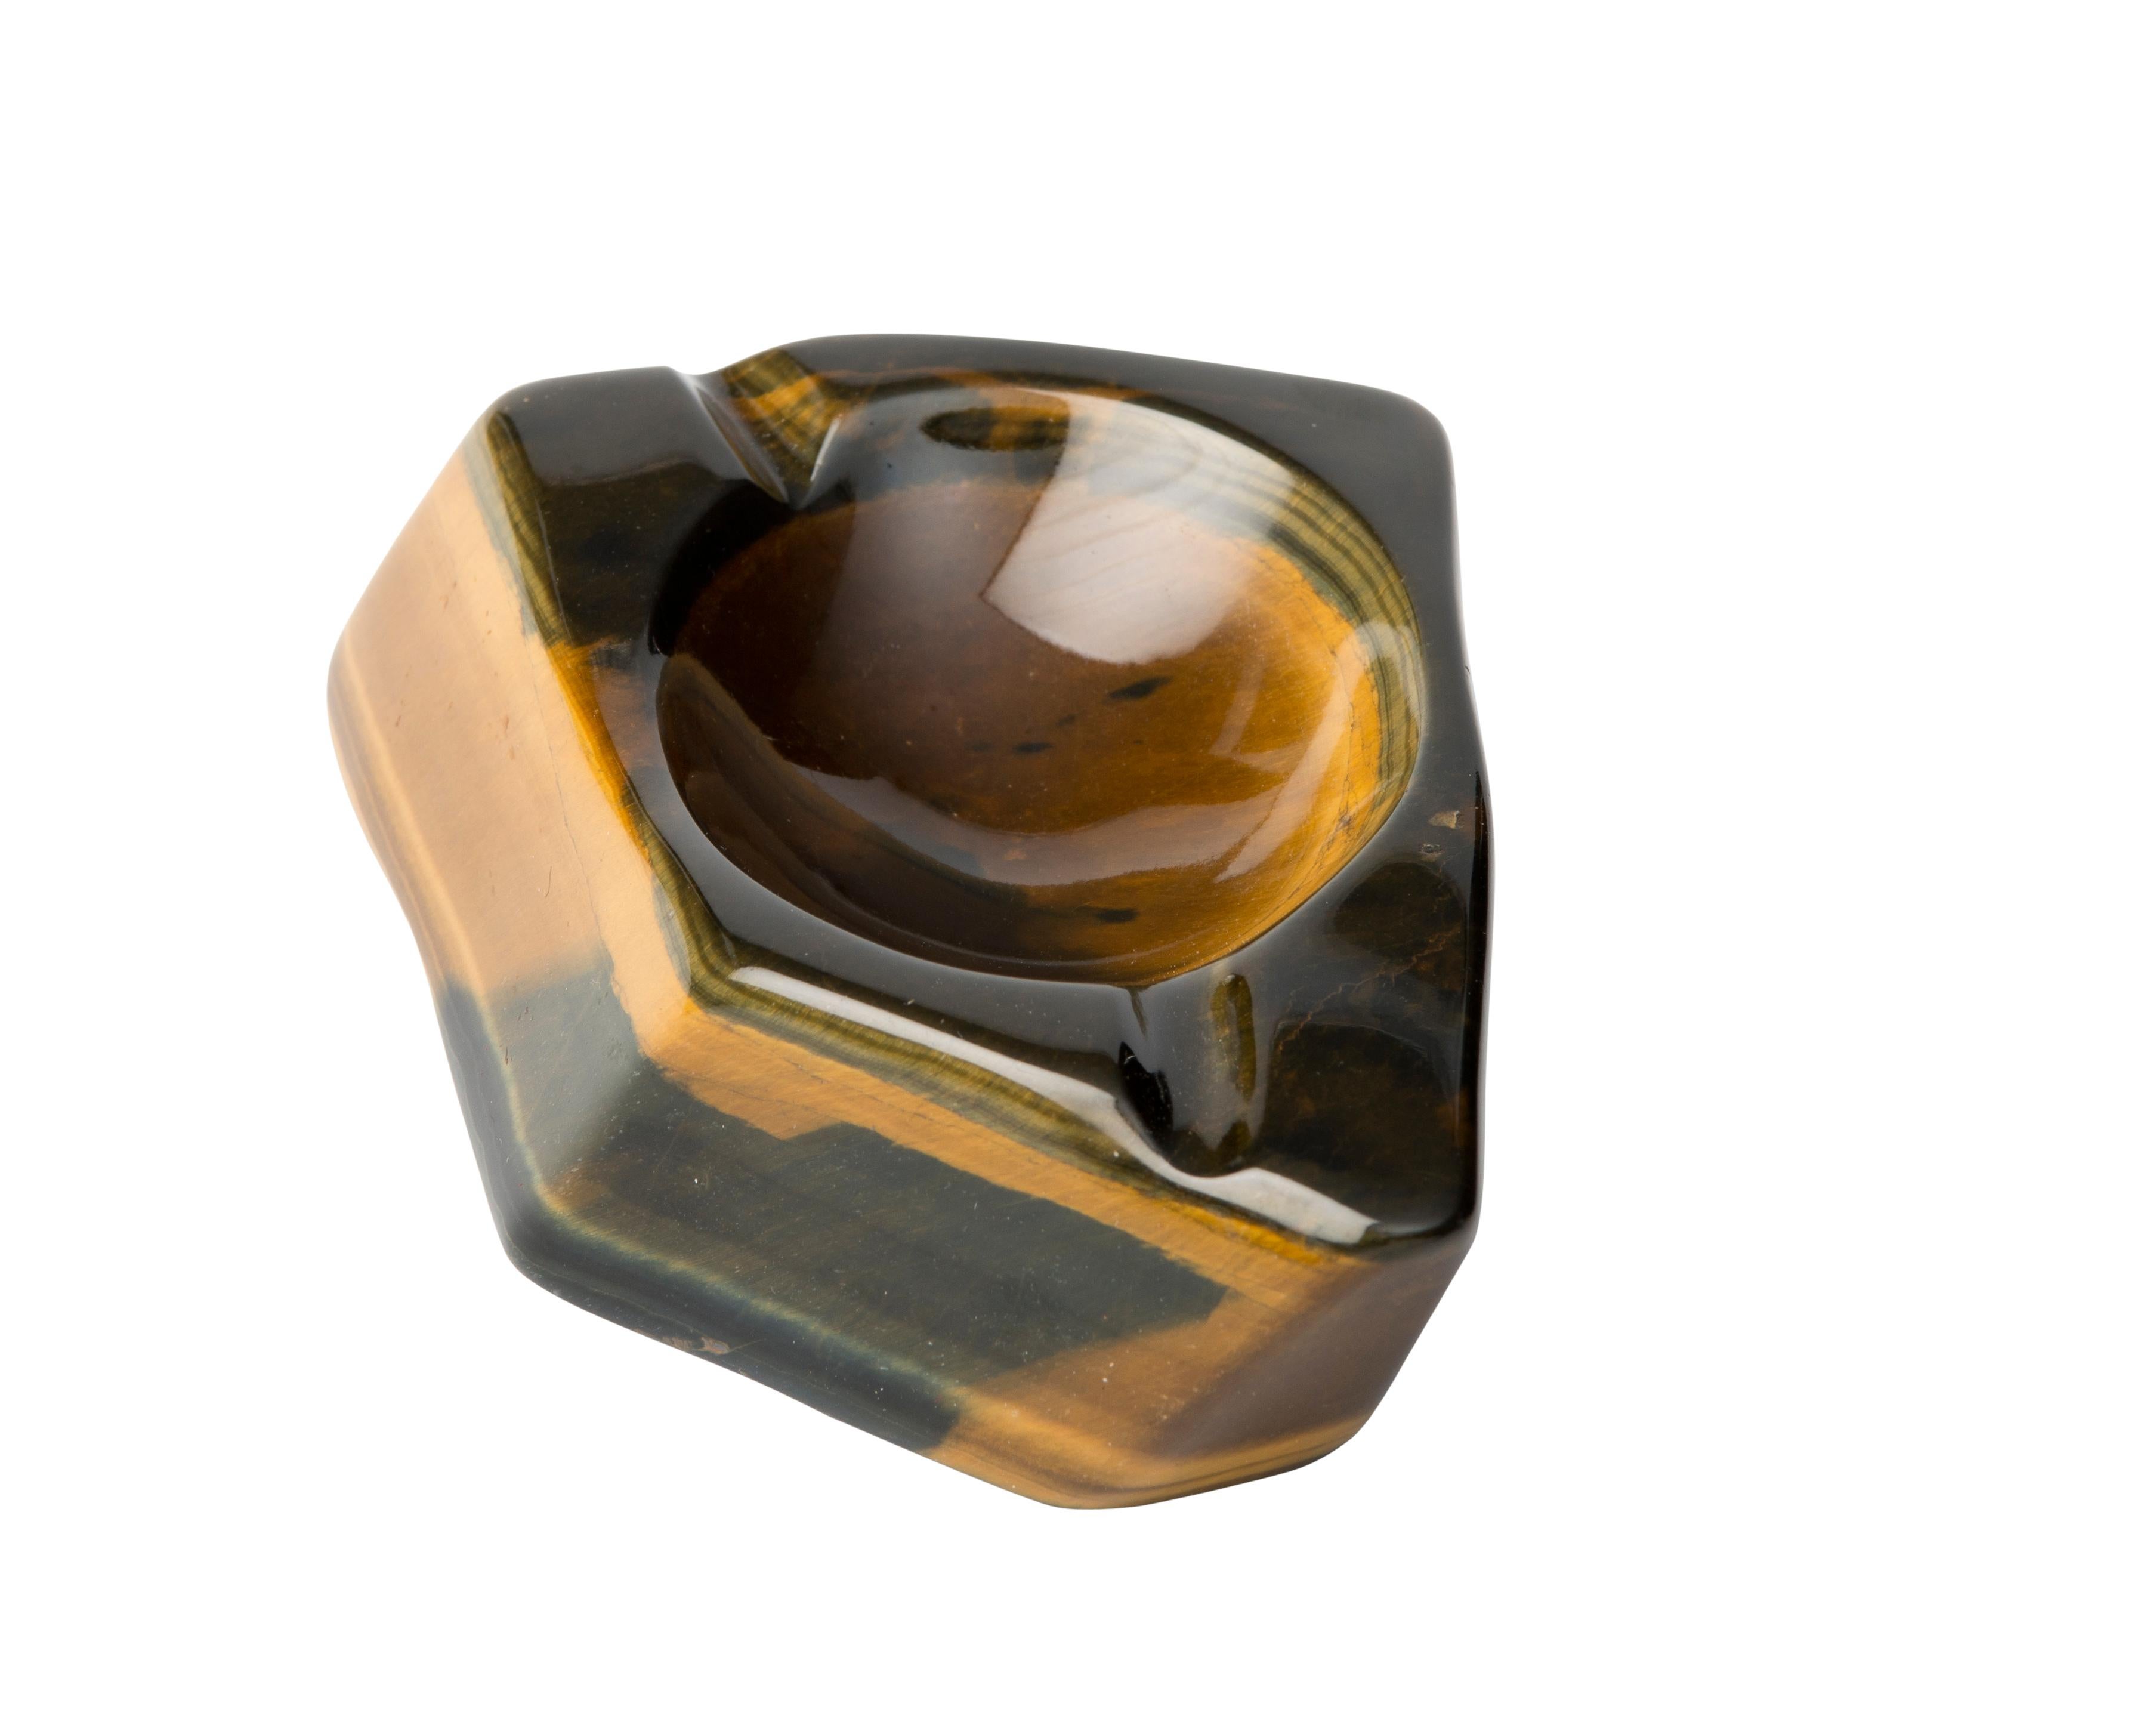 Solid tiger eye stone ashtray, polished, from South Africa. 
Tiger's eye is a mineral with a silky lustre and distinctive red-brown golden coloring. In the 16th century it was more precious than gold, often used as eyes in deity statues, also worn